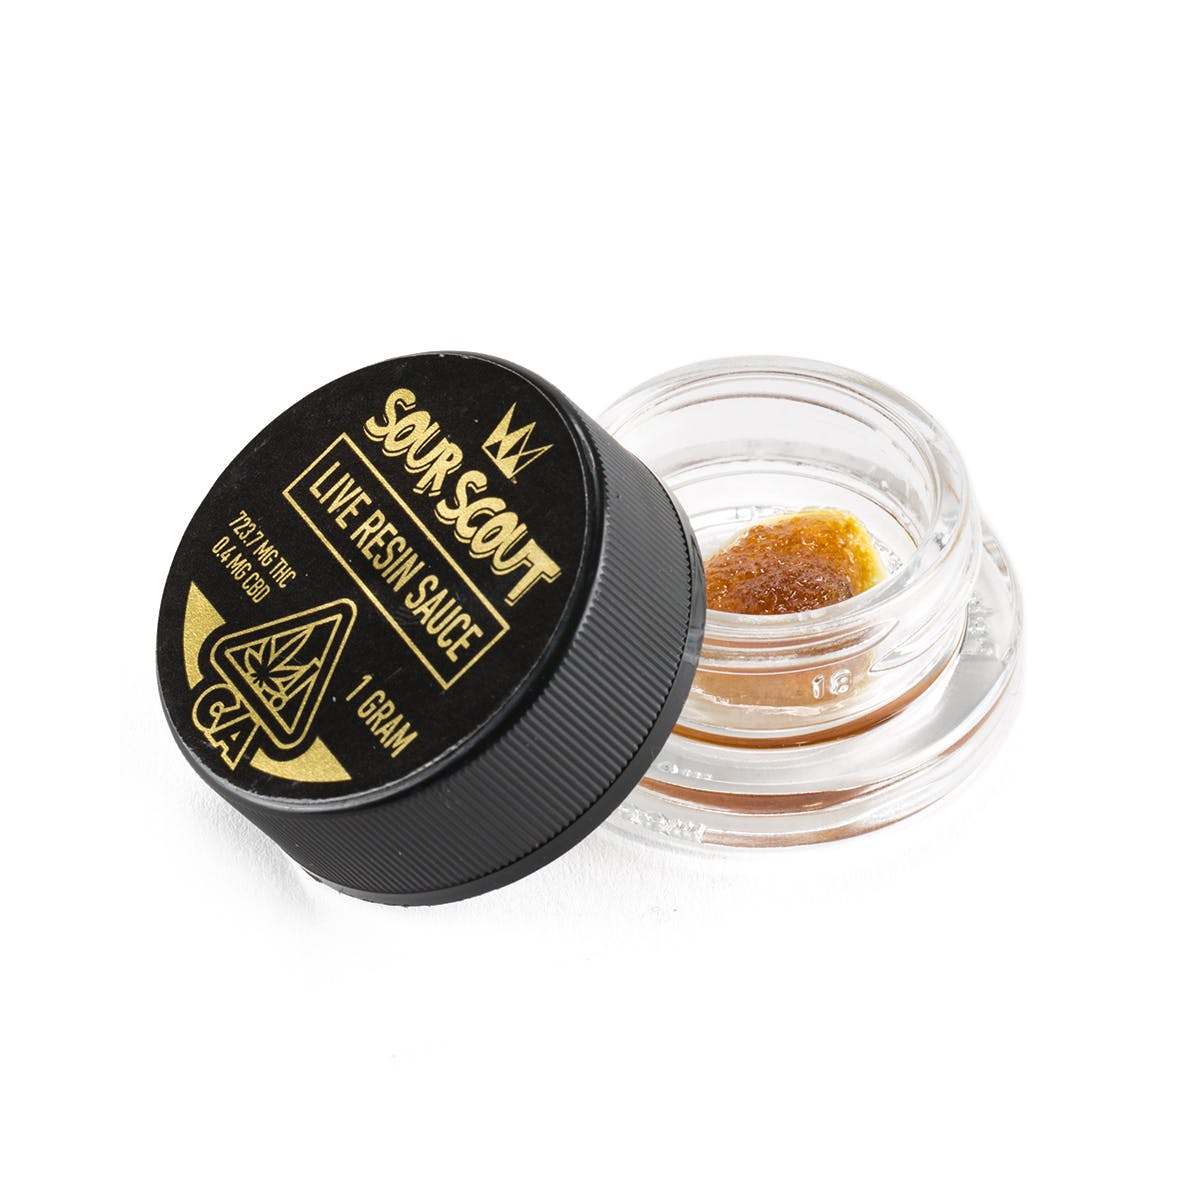 Sour Scout Live Resin Sauce